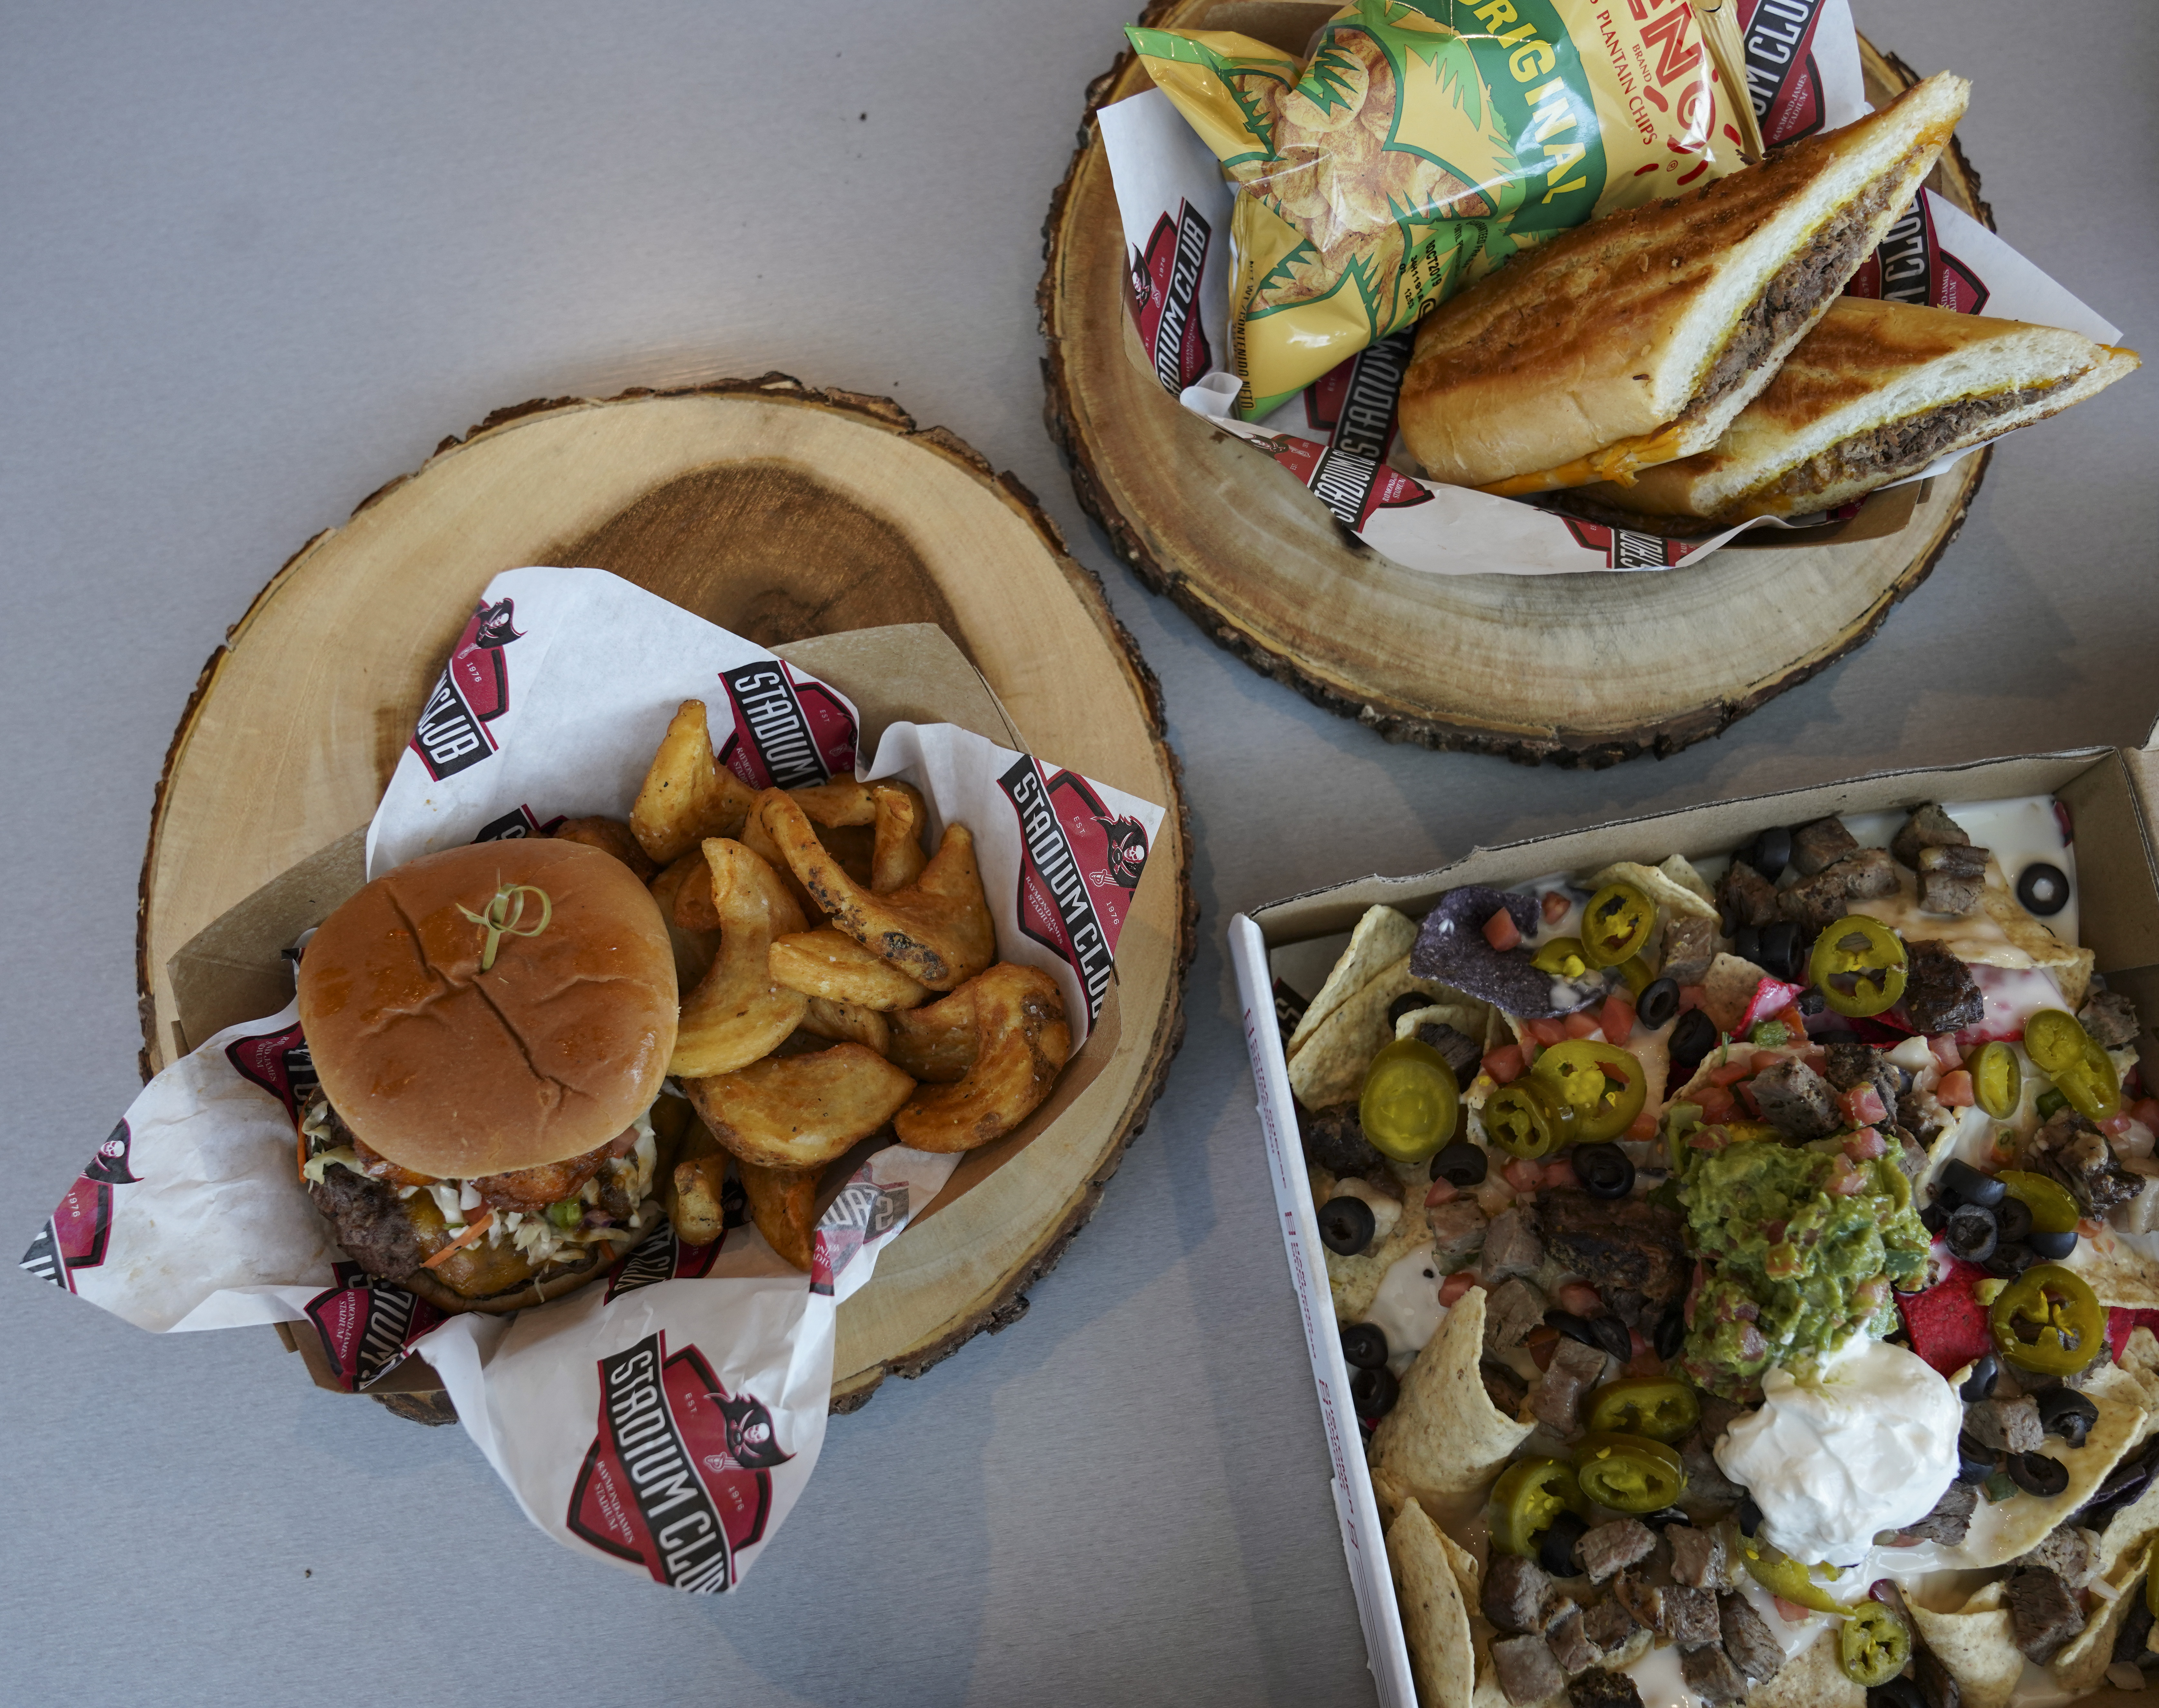 Here's what you'll be eating at the next Bucs game